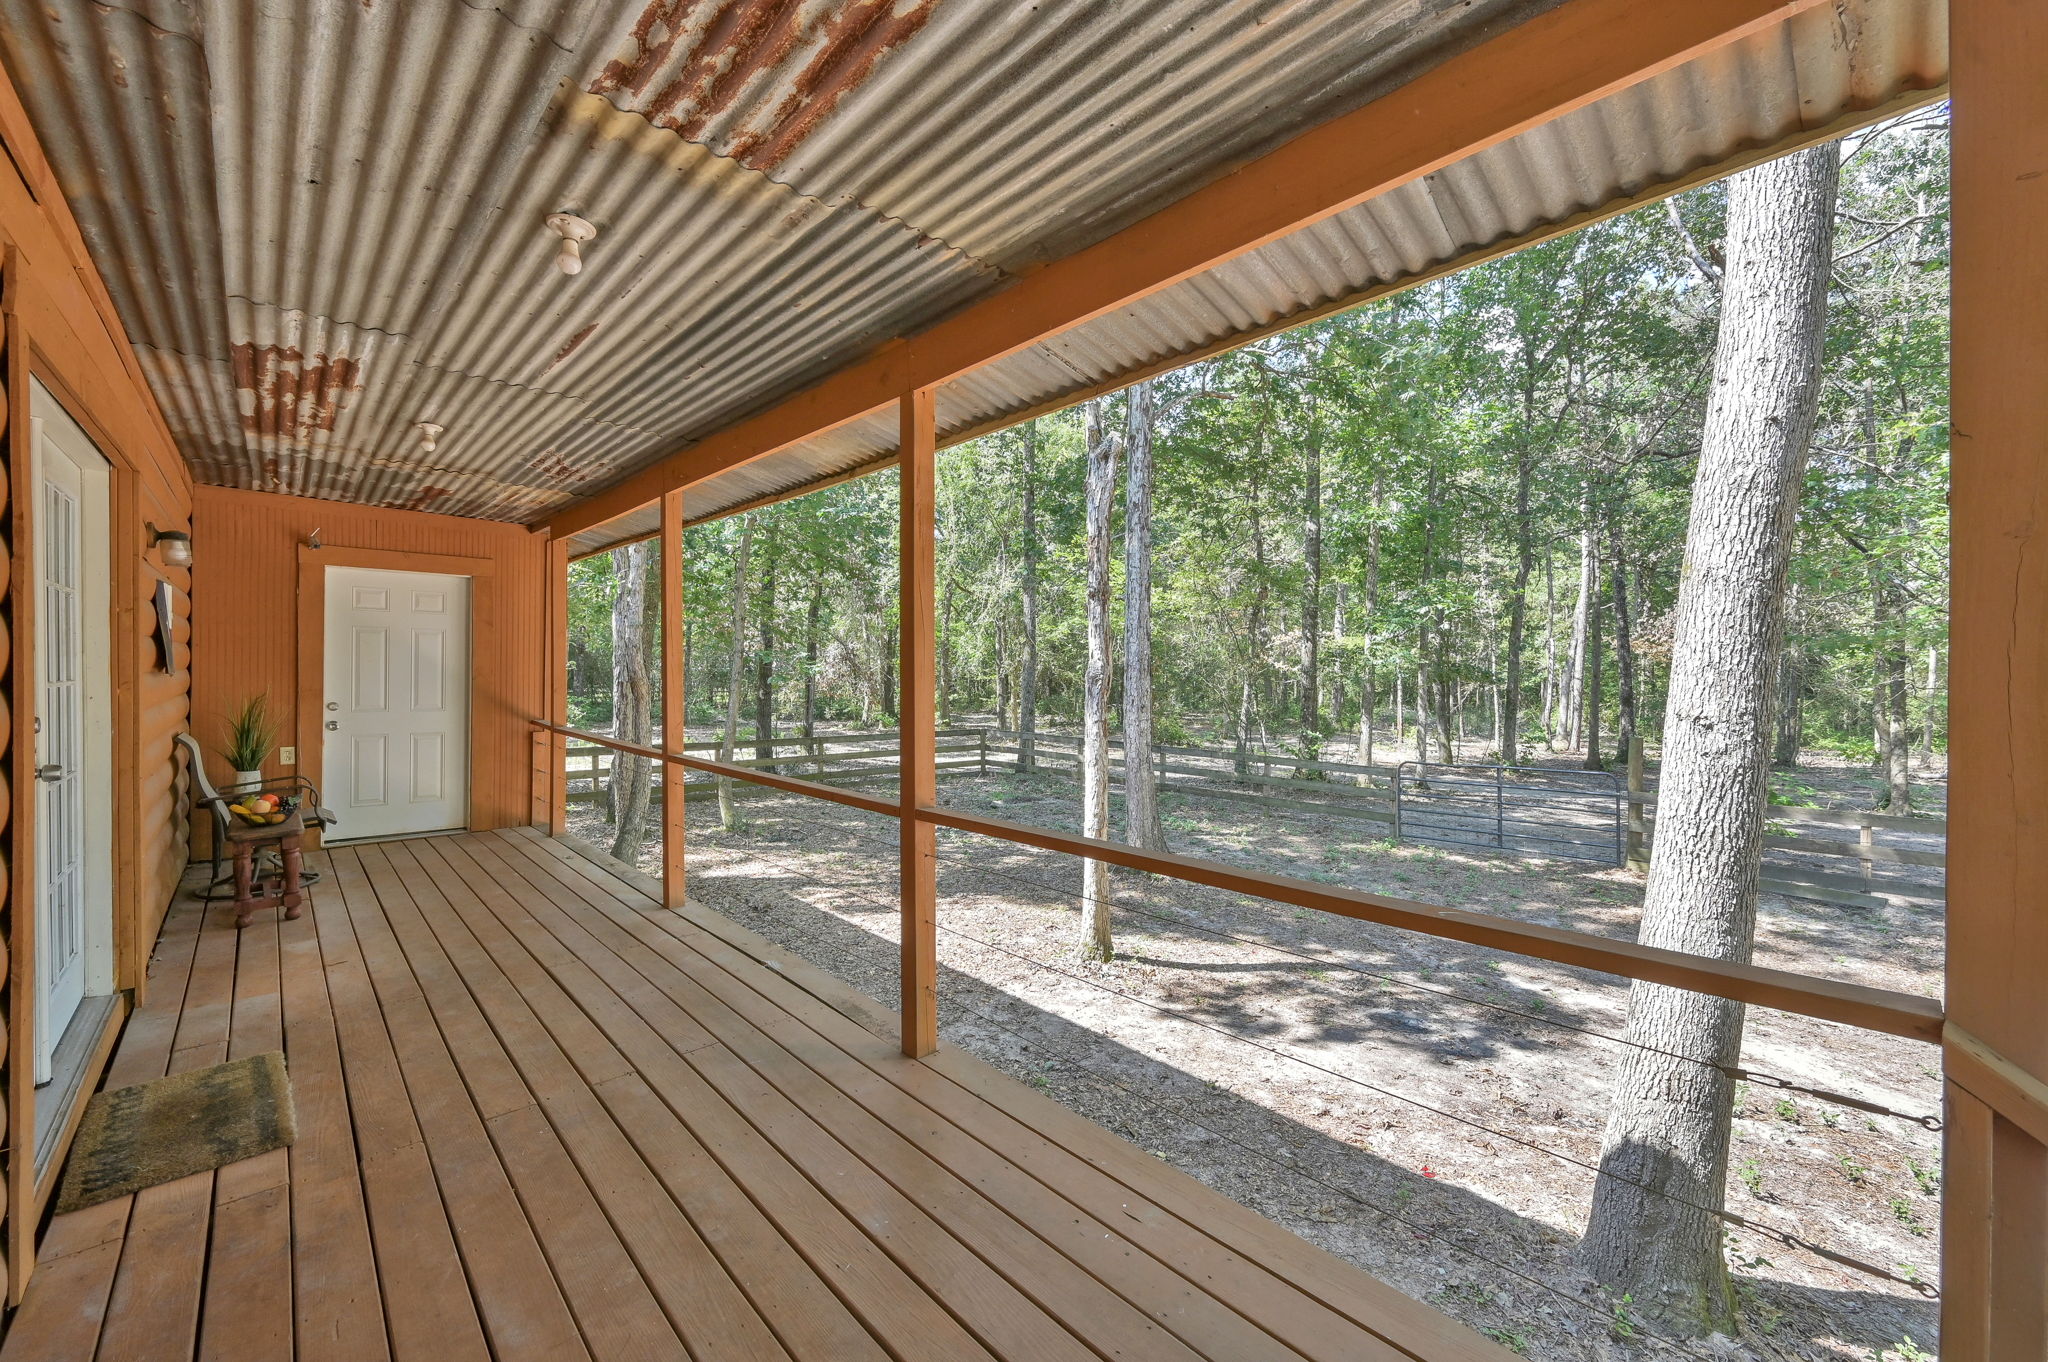 BACK COVERED PORCH (approx. 26' x 7') w/ an additional good-sized STORAGE AREA on the far end.